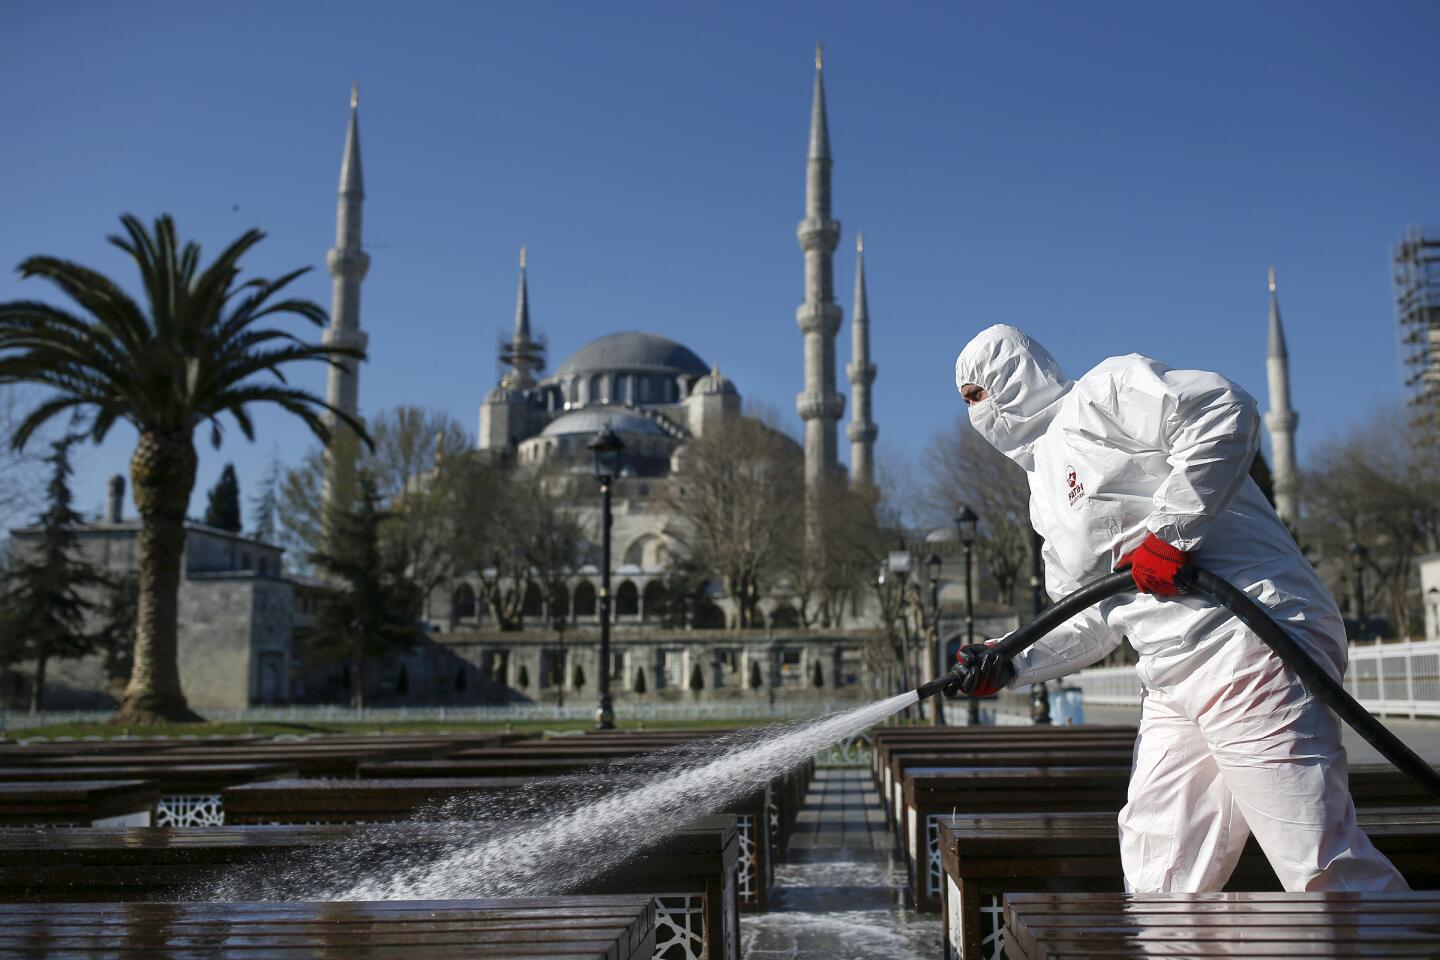 Turkey: A municipality worker wearing a face mask and protective suit disinfects chairs outside the historical Sultan Ahmed Mosque, also known as Blue Mosque in Istanbul, Turkey.